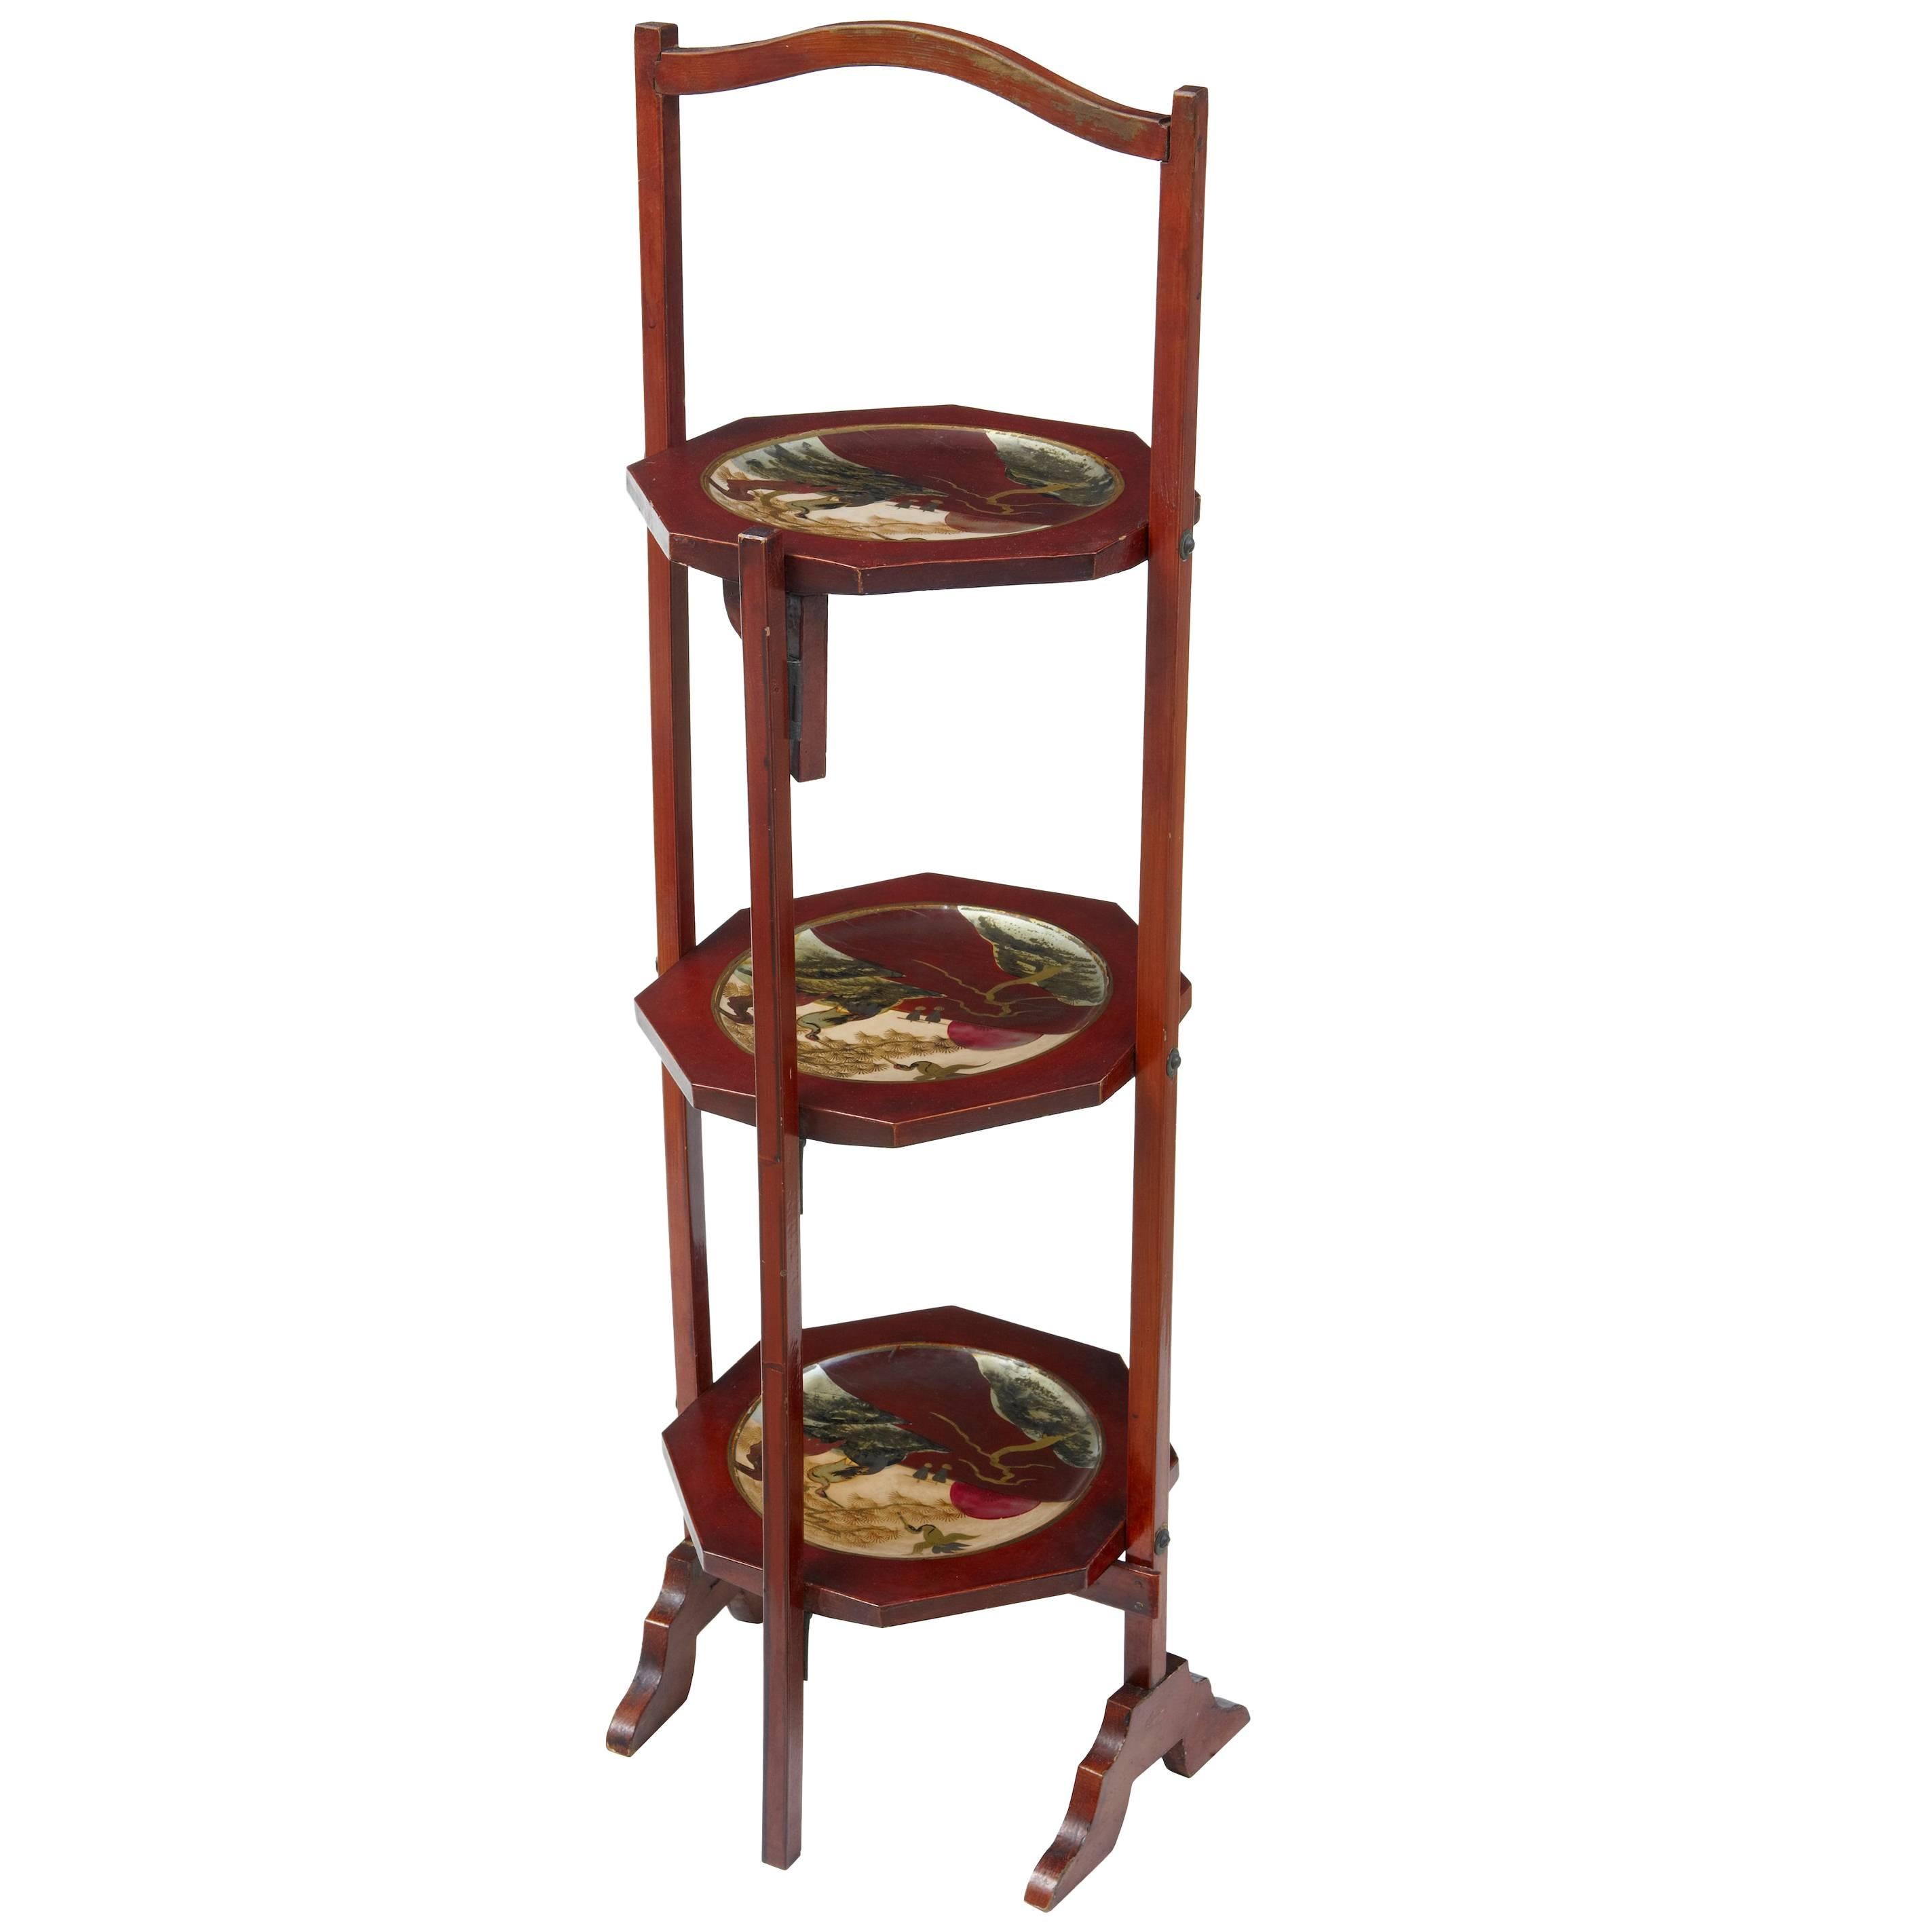 1920s Japanese Lacquered Three-Tier Cake Stand